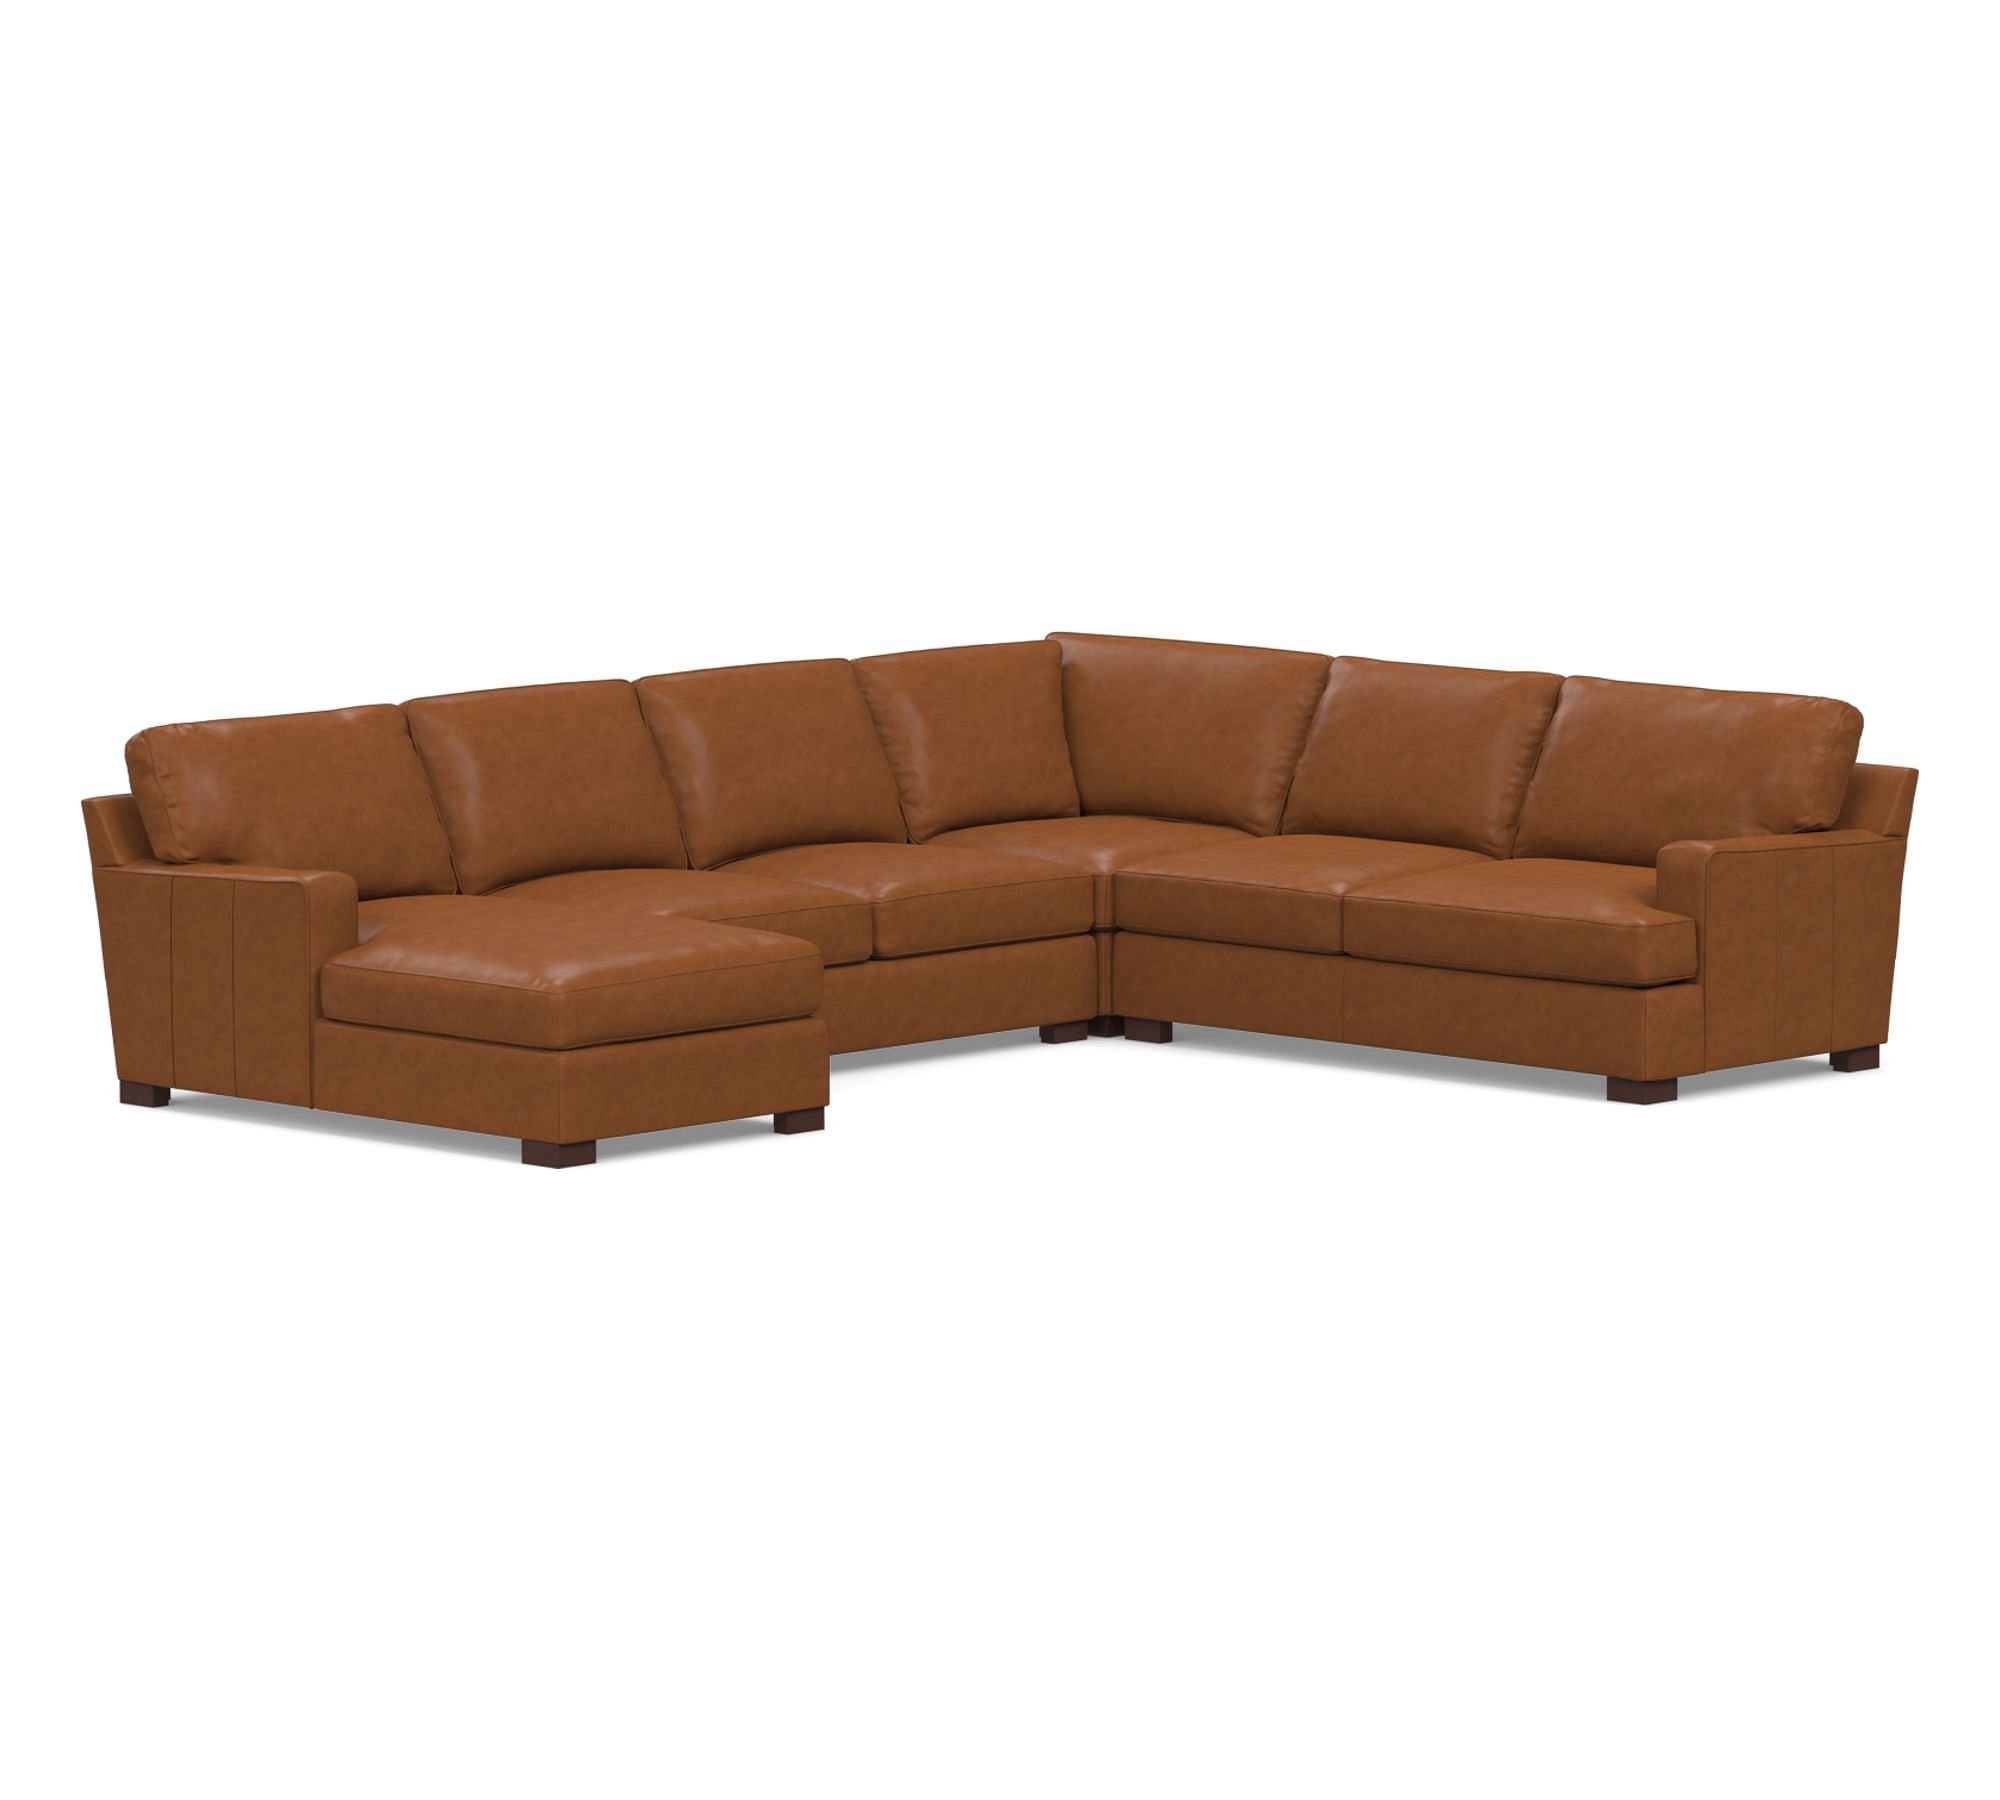 Townsend Square Arm Leather 4-Piece Chaise Sectional (113")